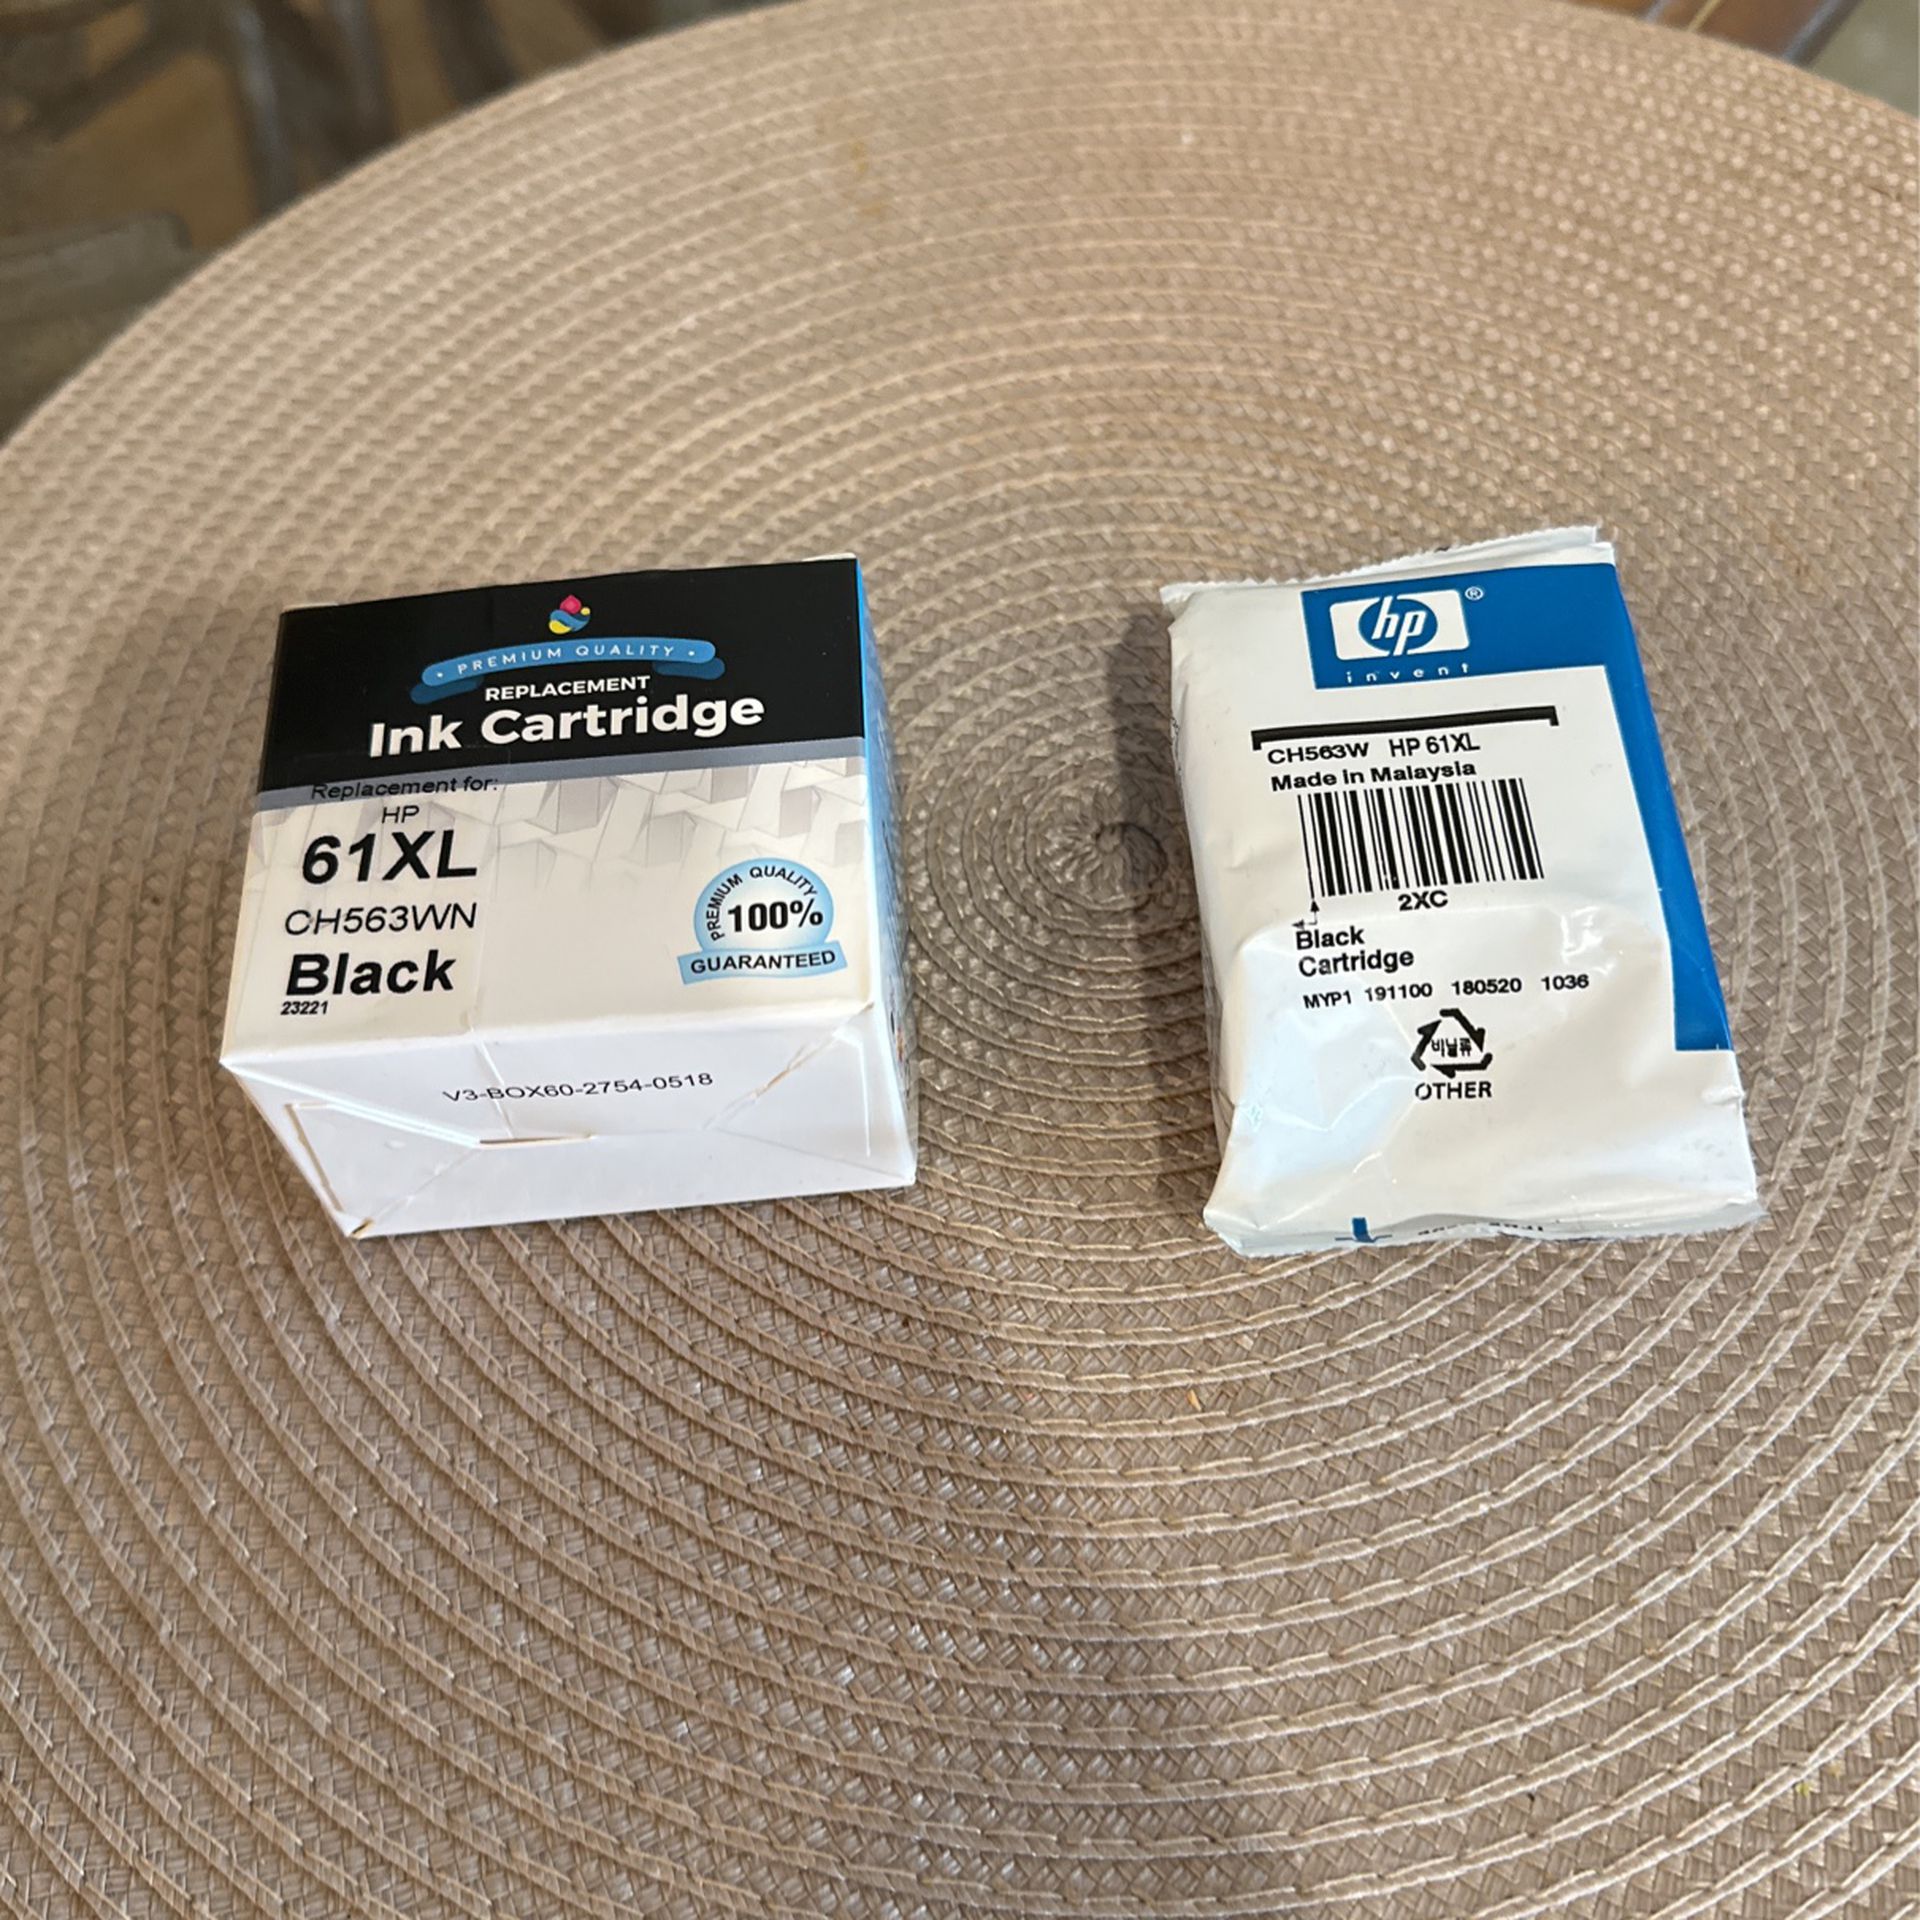 Two 61XL INK CARTRIDGES FOR HP 